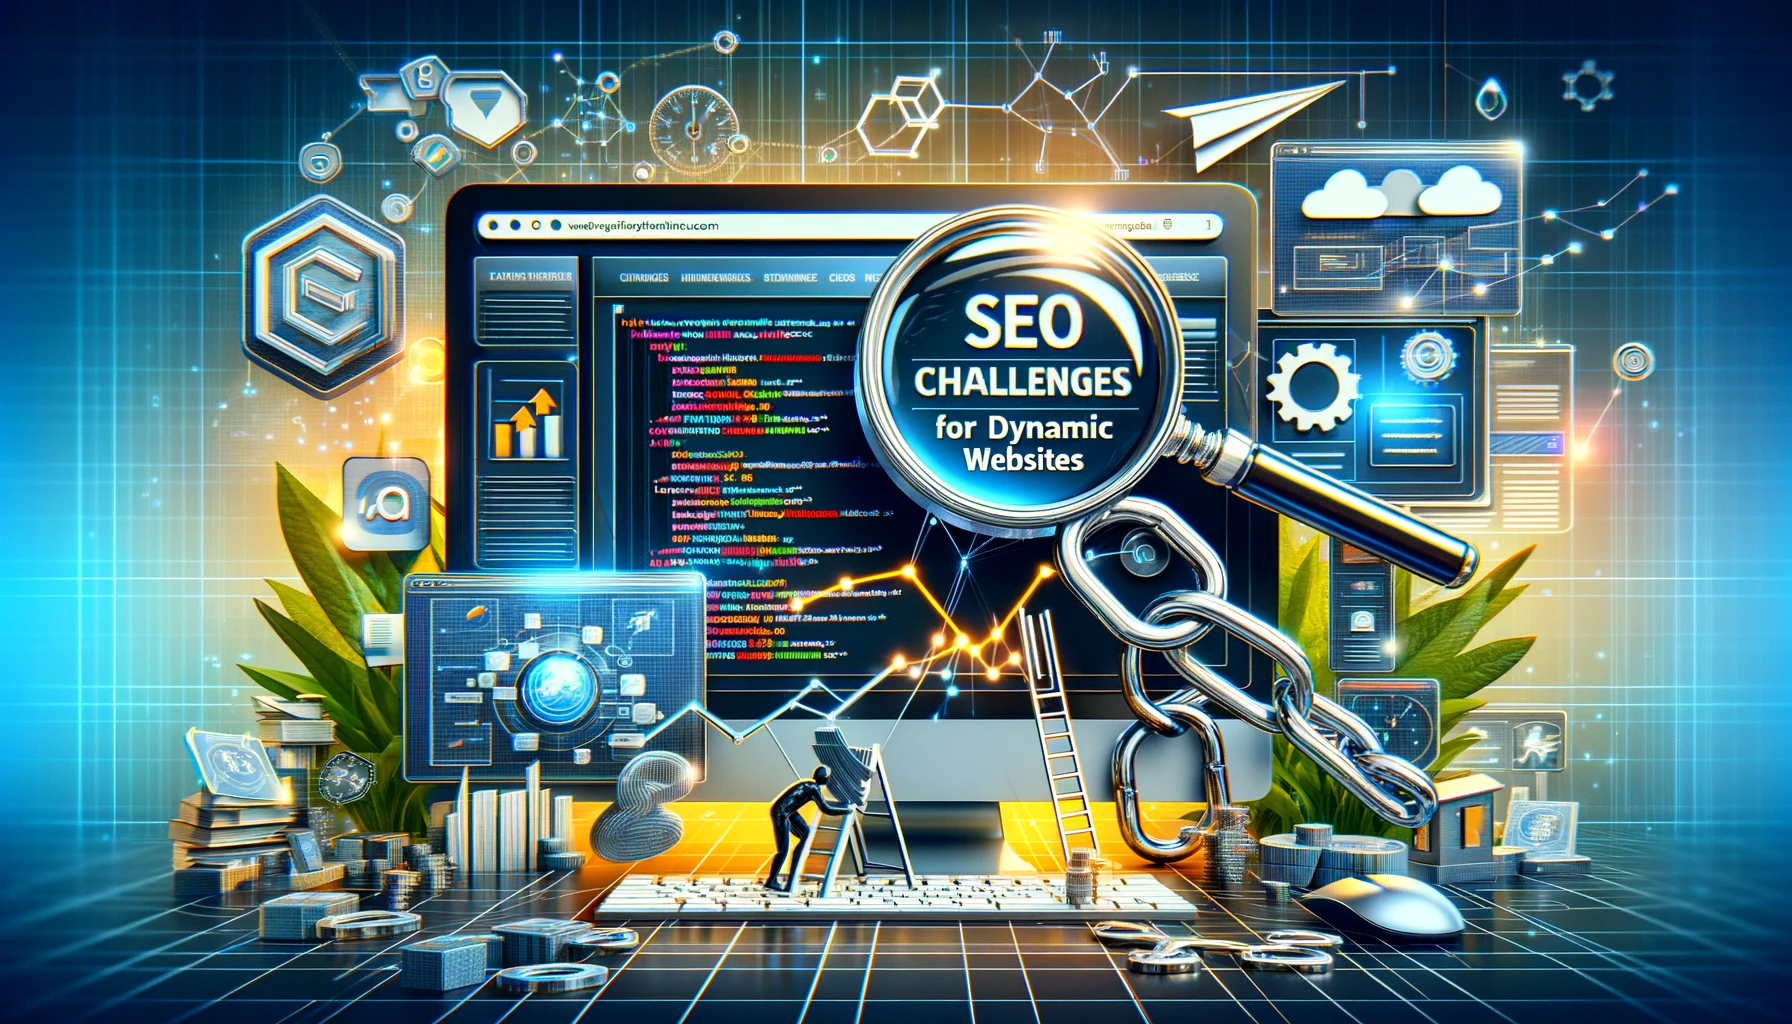 SEO Challenges for Dynamic Websites